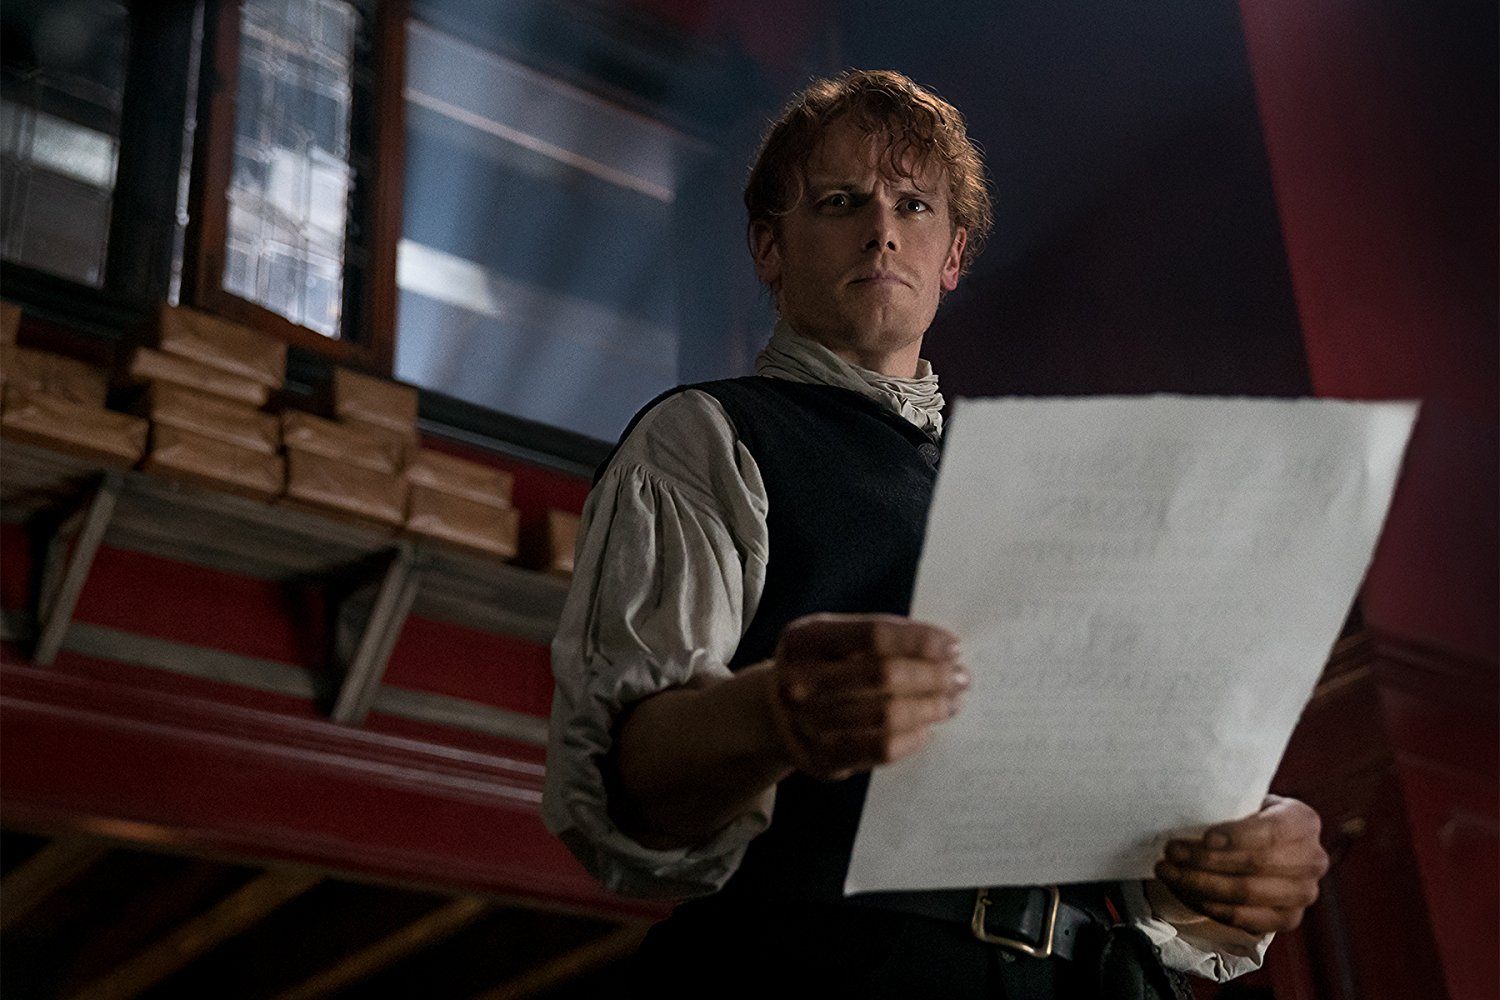 Jamie holding a piece of paper in Outlander